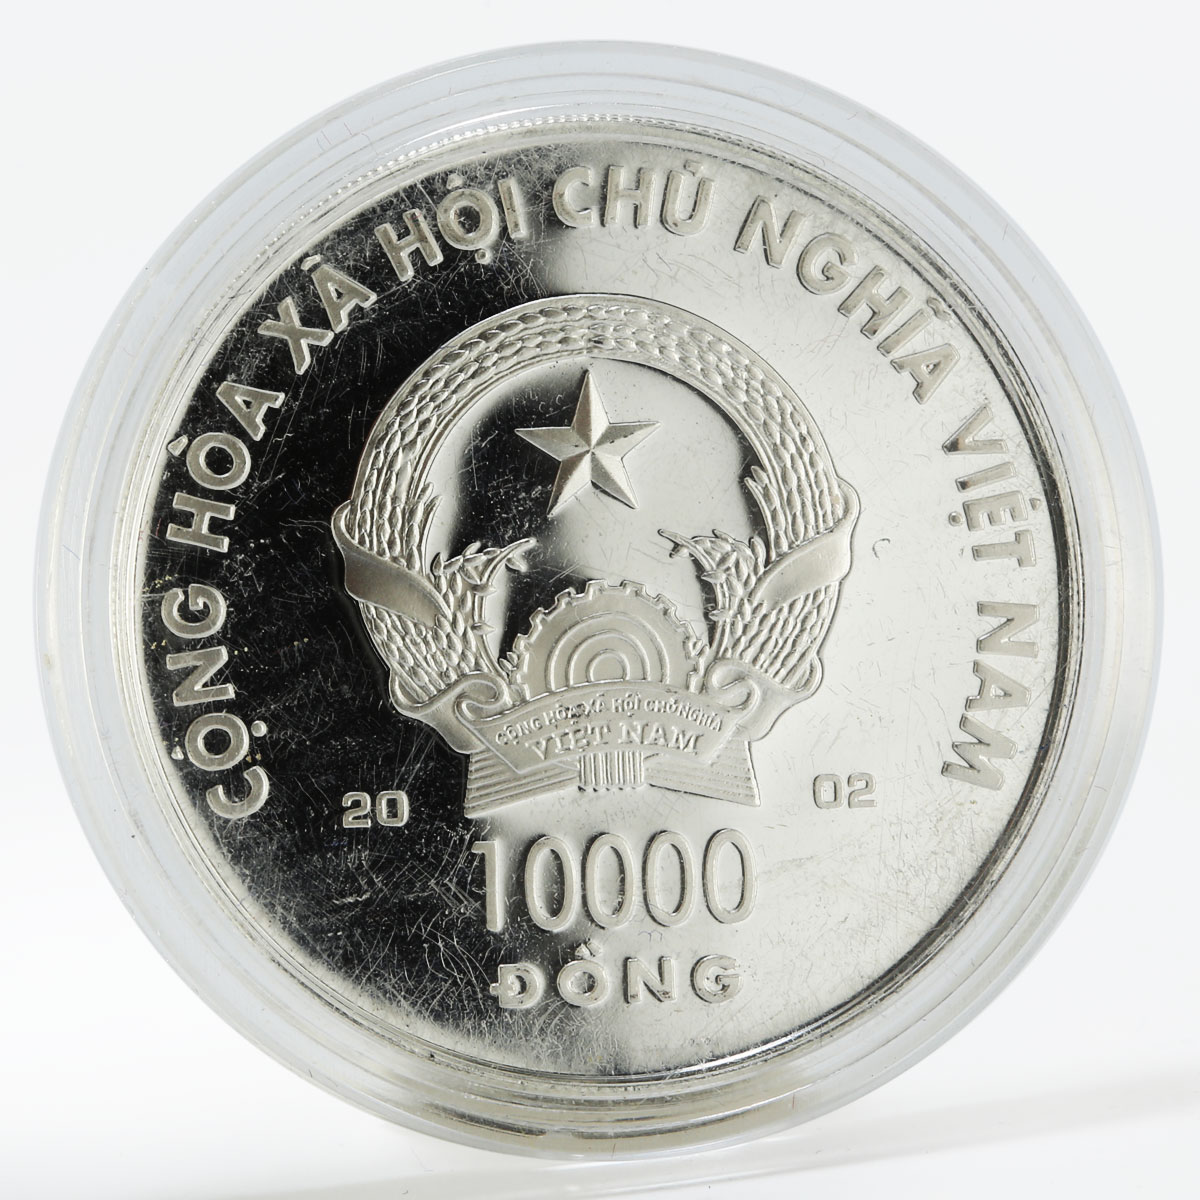 Vietnam 10000 dong Year of the Horse proof silver coin 2002